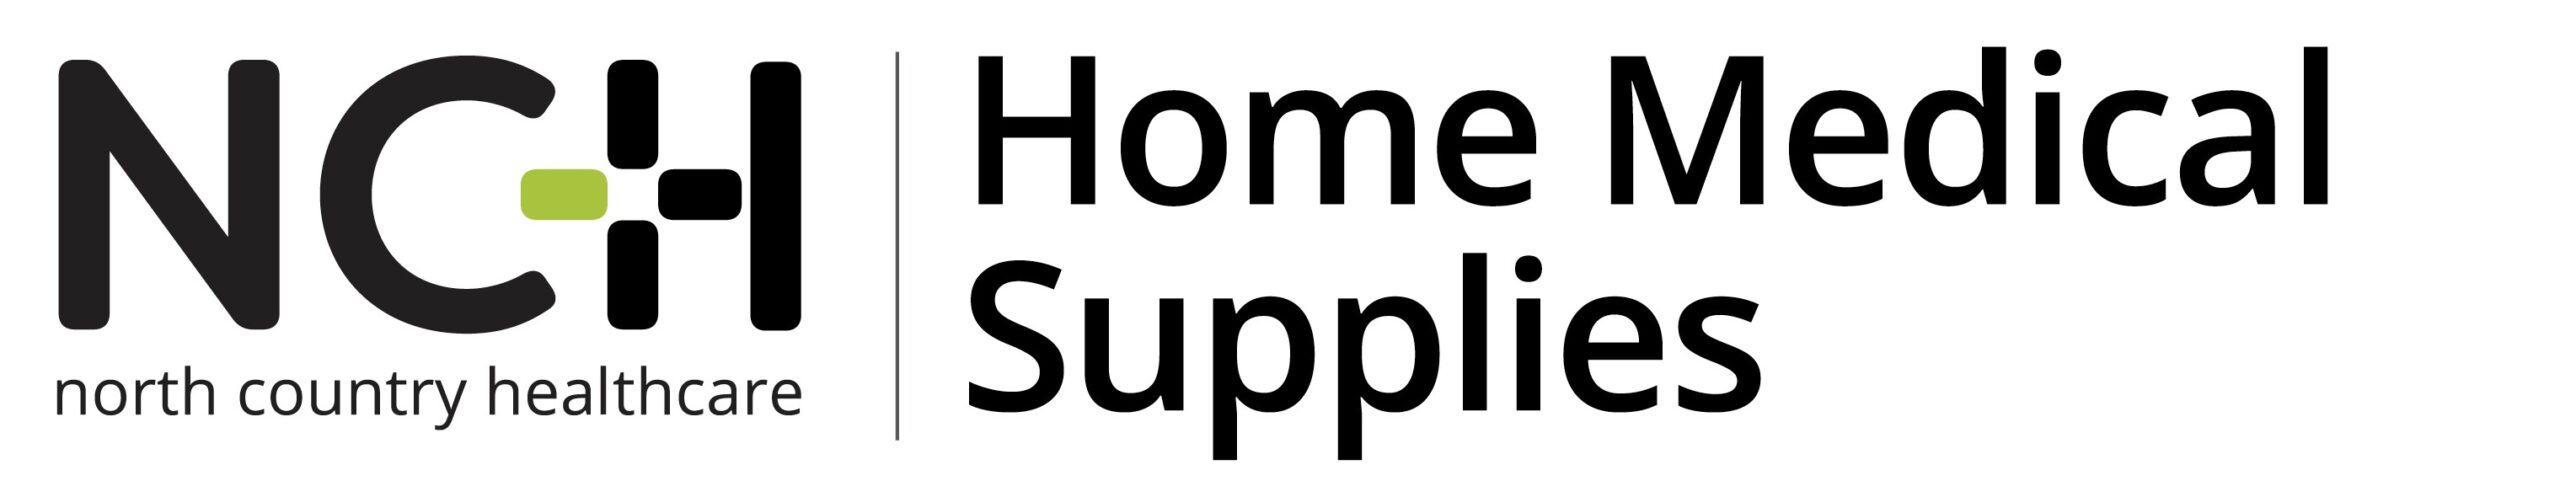 NCH Home Medical Supply